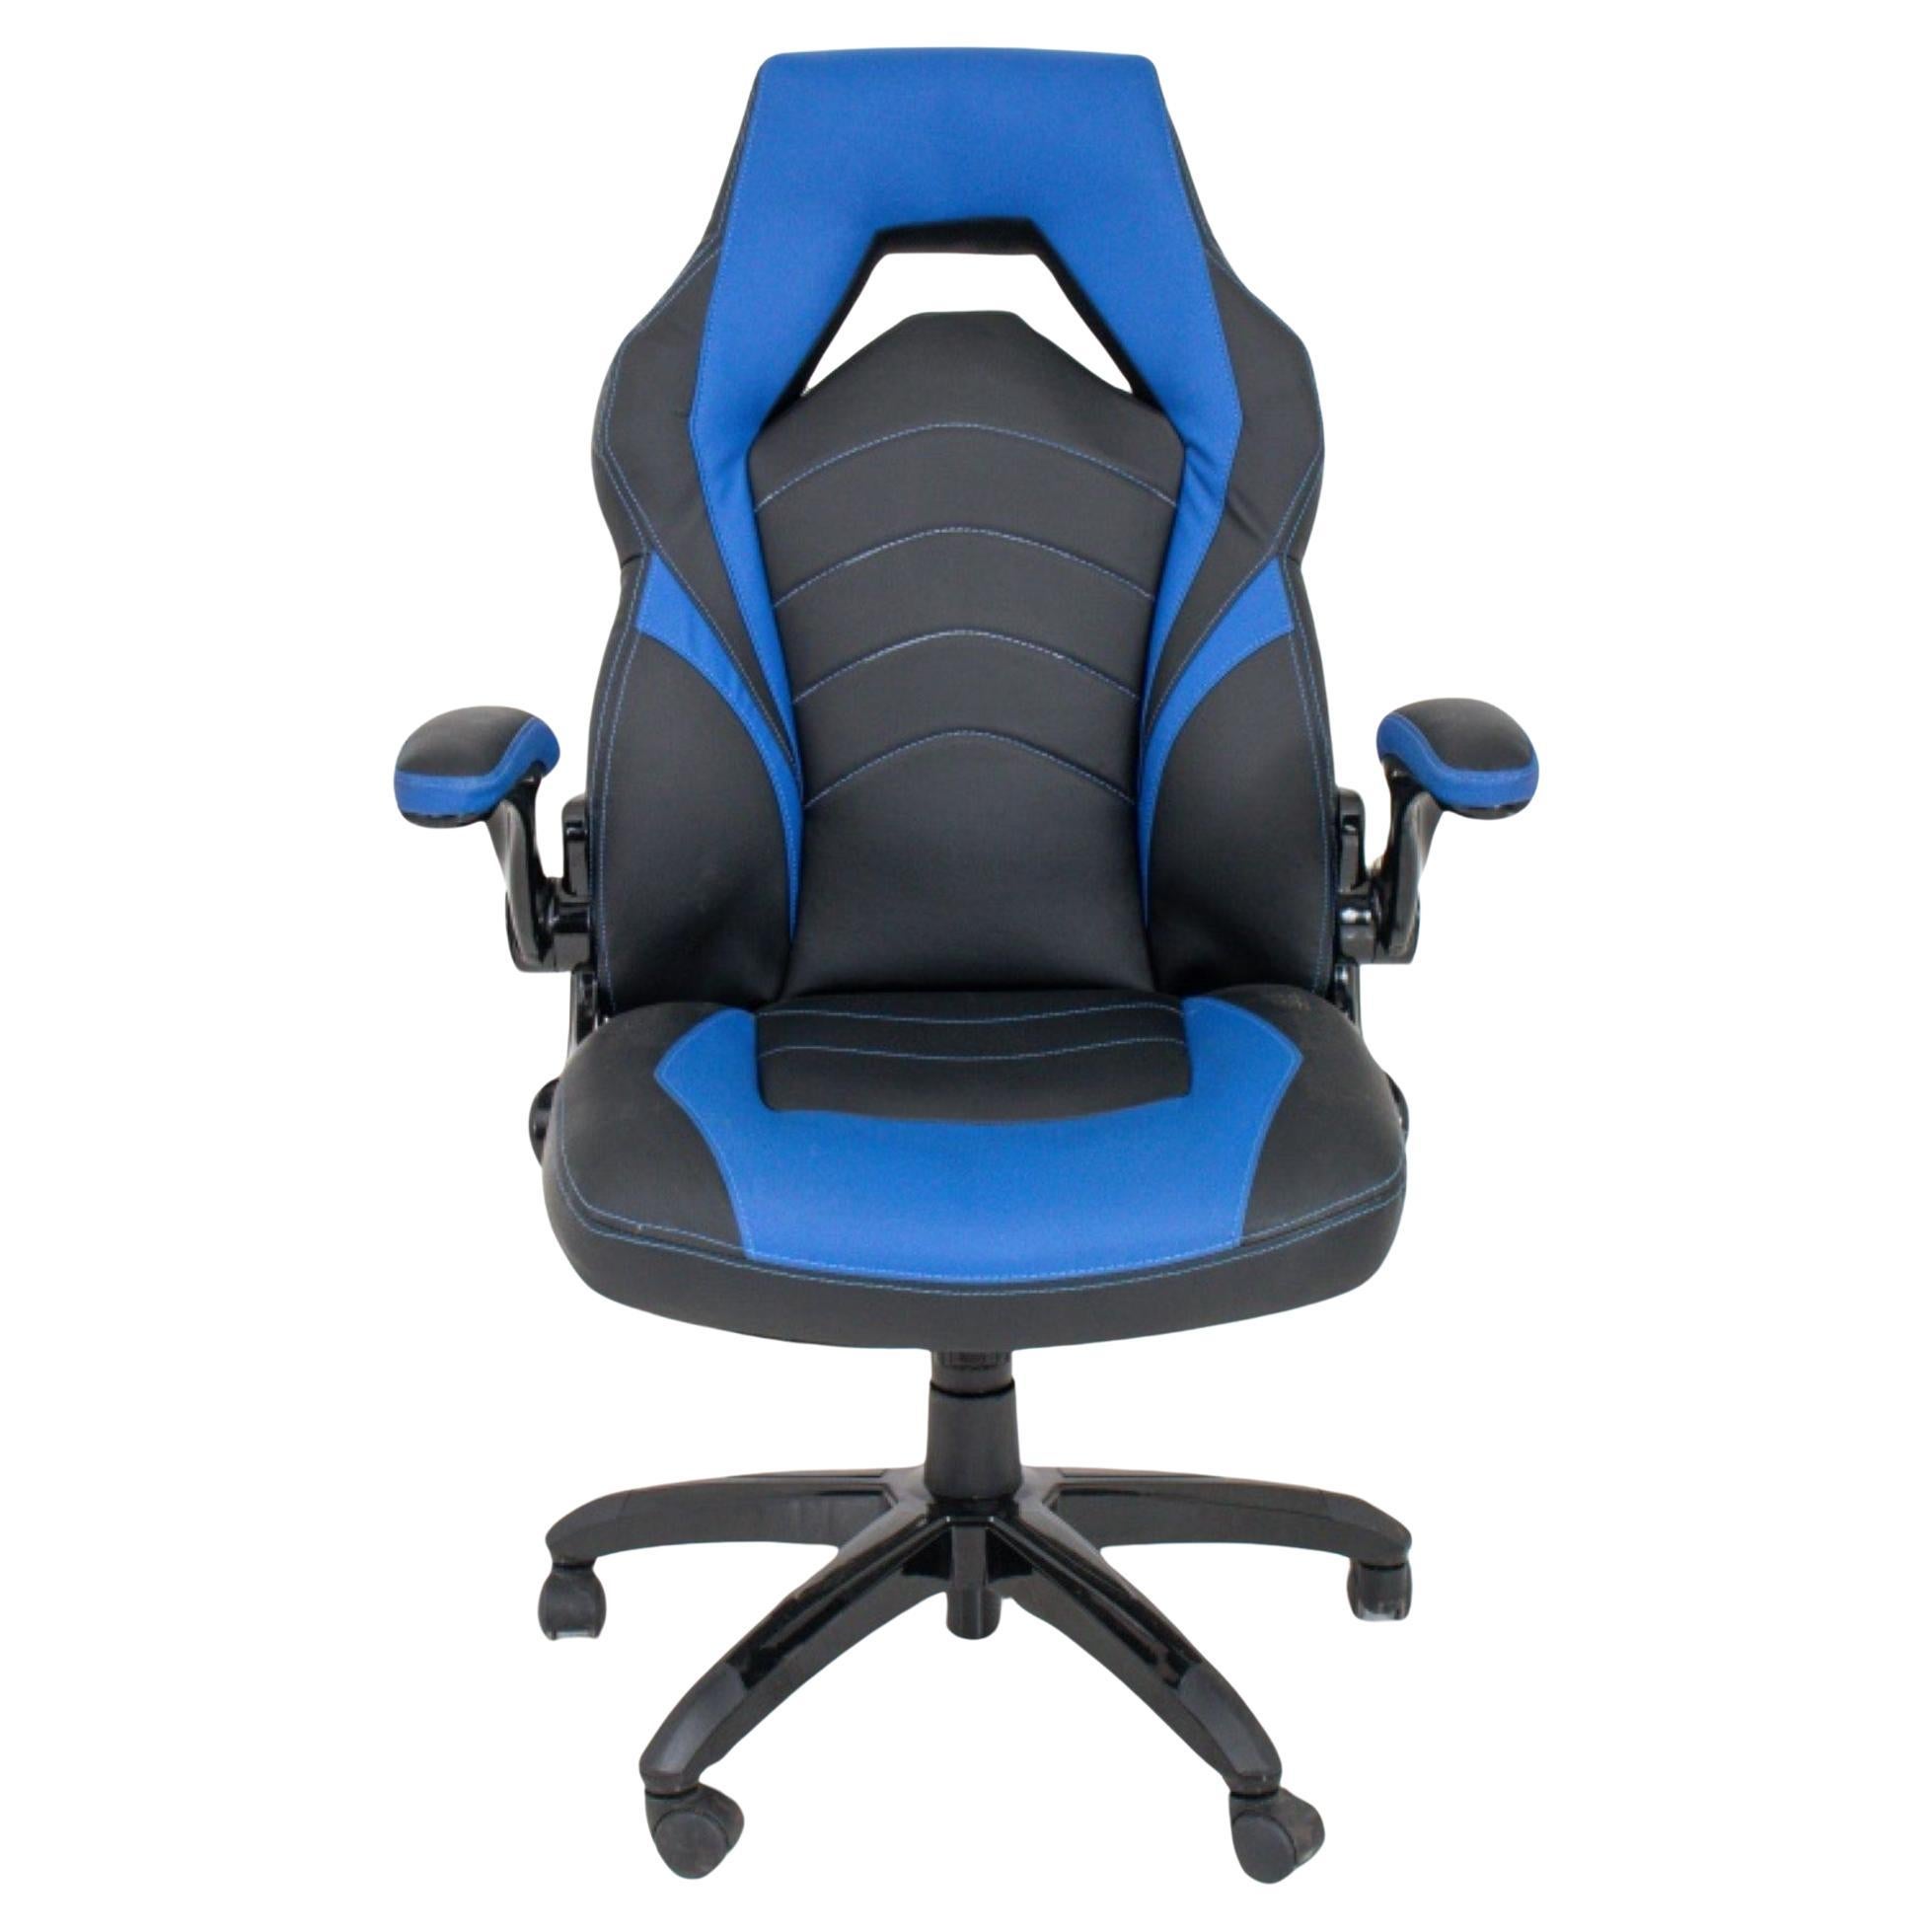 Black & Blue Extra Wide Gamer Chair Desk Chair For Sale